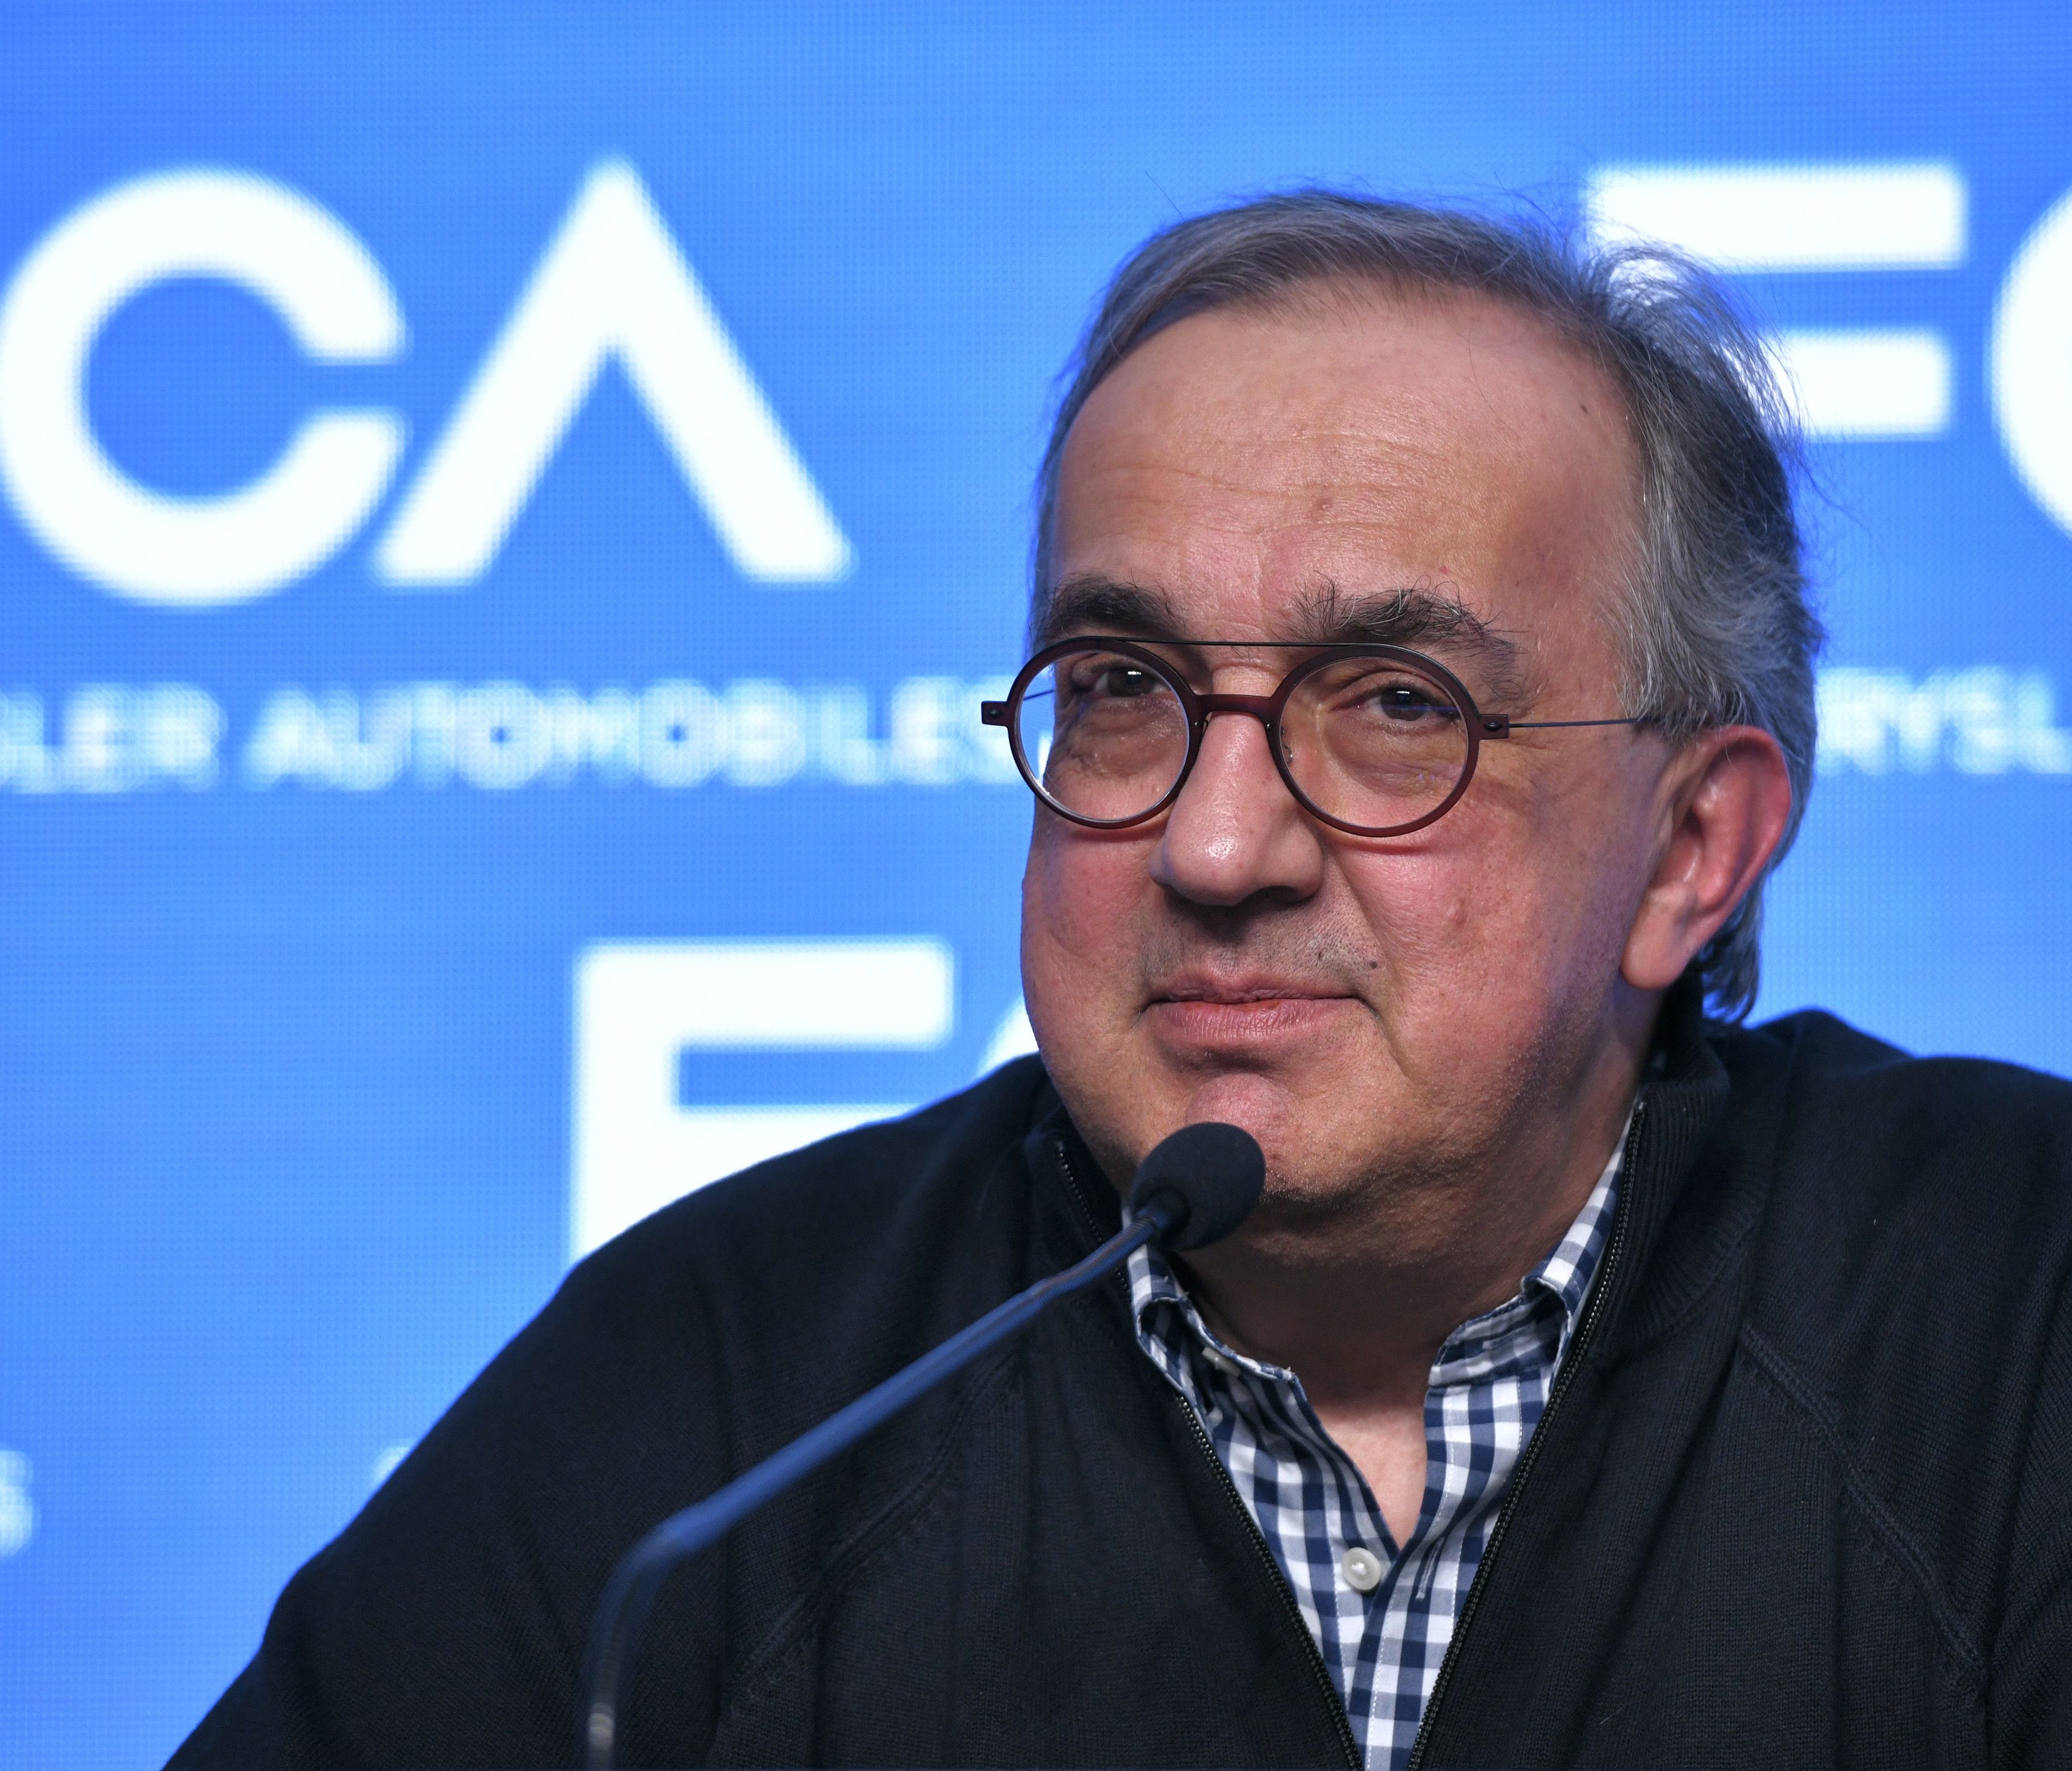 Fiat Chrysler Automobiles's Chief Executive Officer Sergio Marchionne looks on during a press conference after the FCA Capital Markets Day in Balocco, Italy on June 1, 2018.